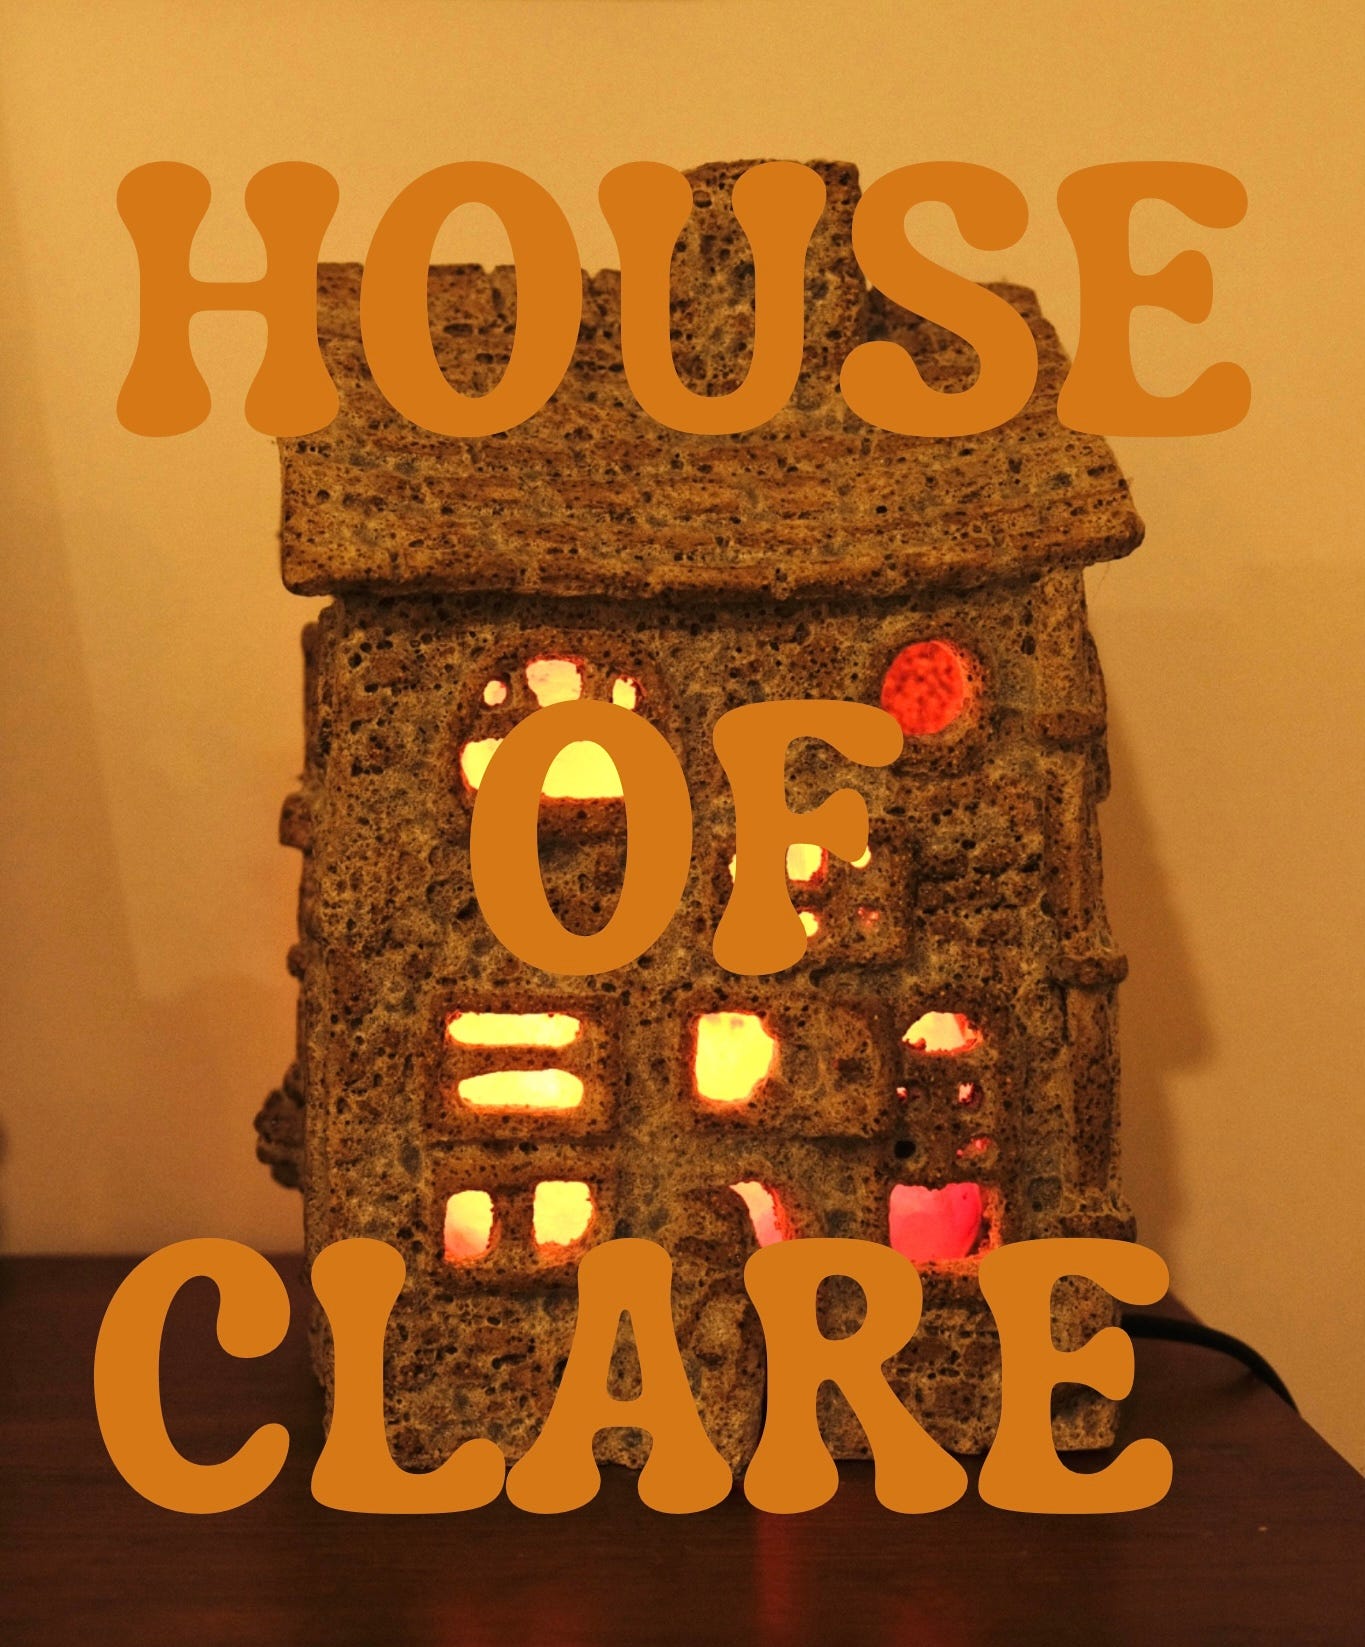 a ceramic piece of a house that Clare made, with writing "House of Clare" written over it